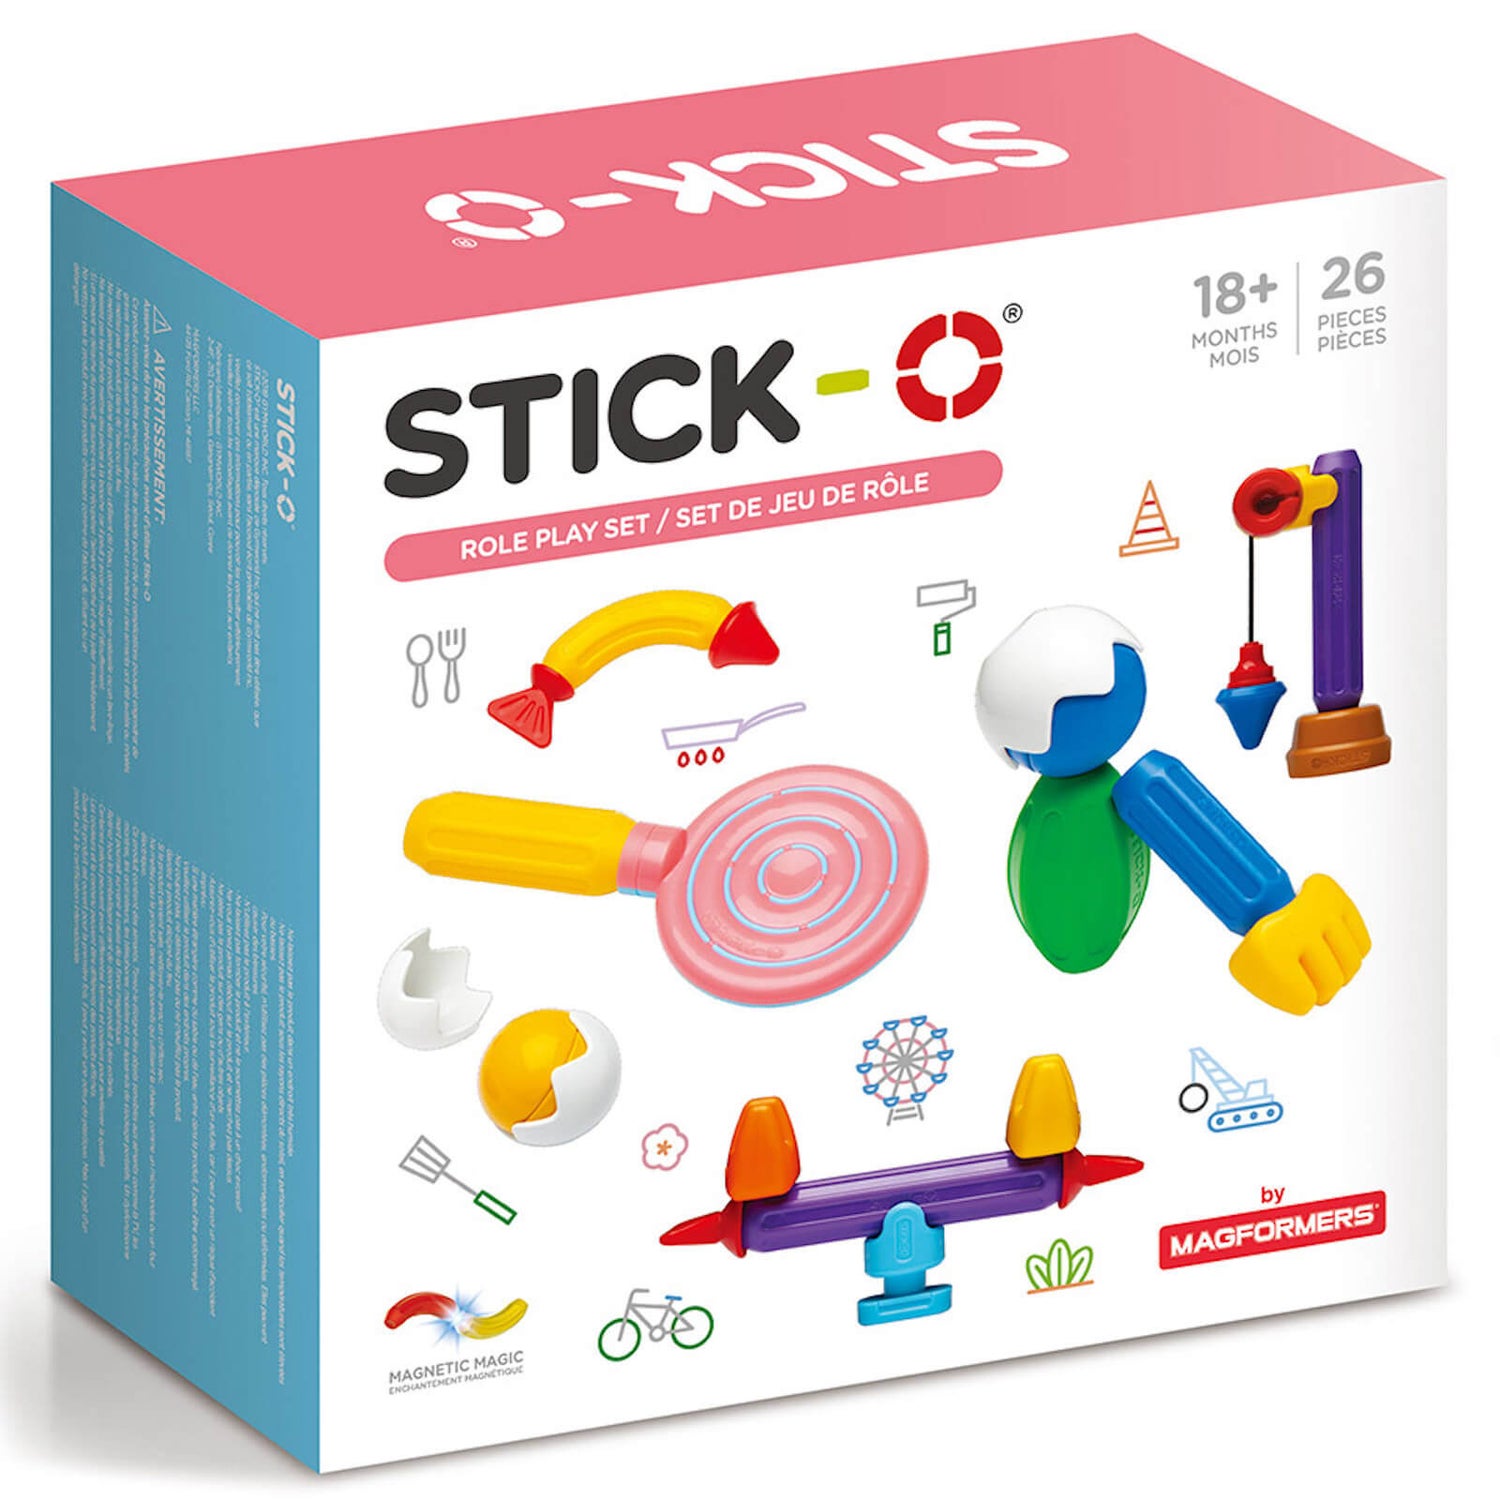 Stick-O - Role Play Magnetic Playset (26pc)